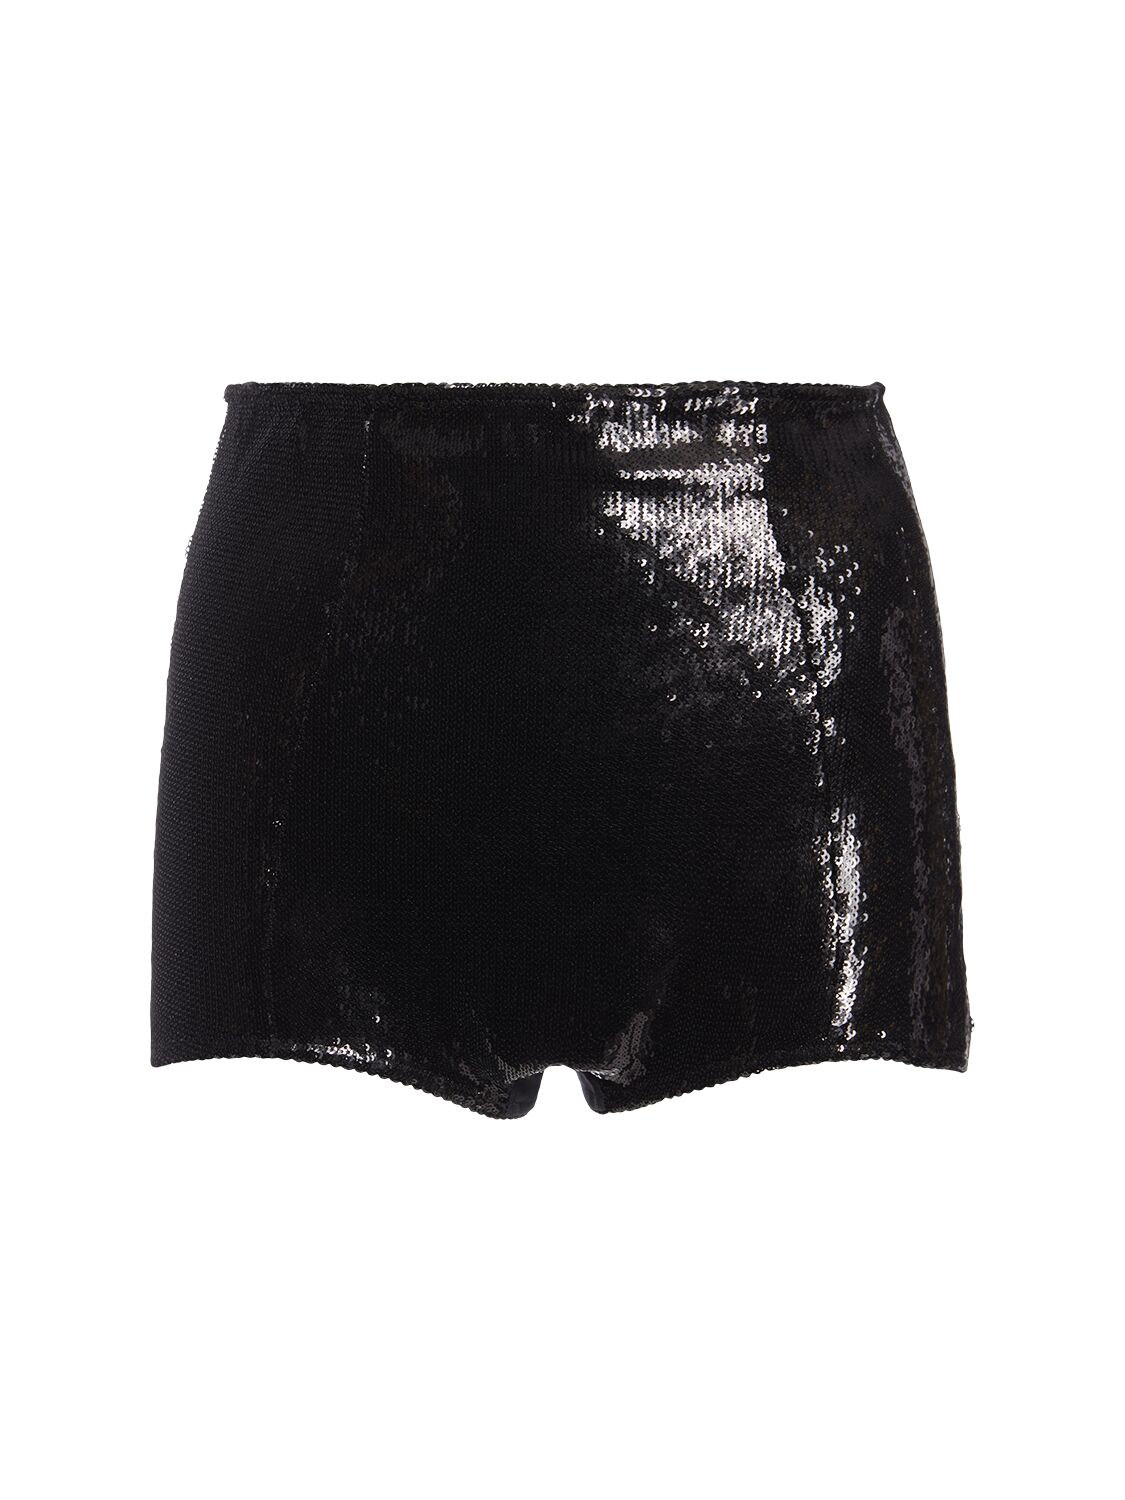 Sequined High Rise Hot Pants